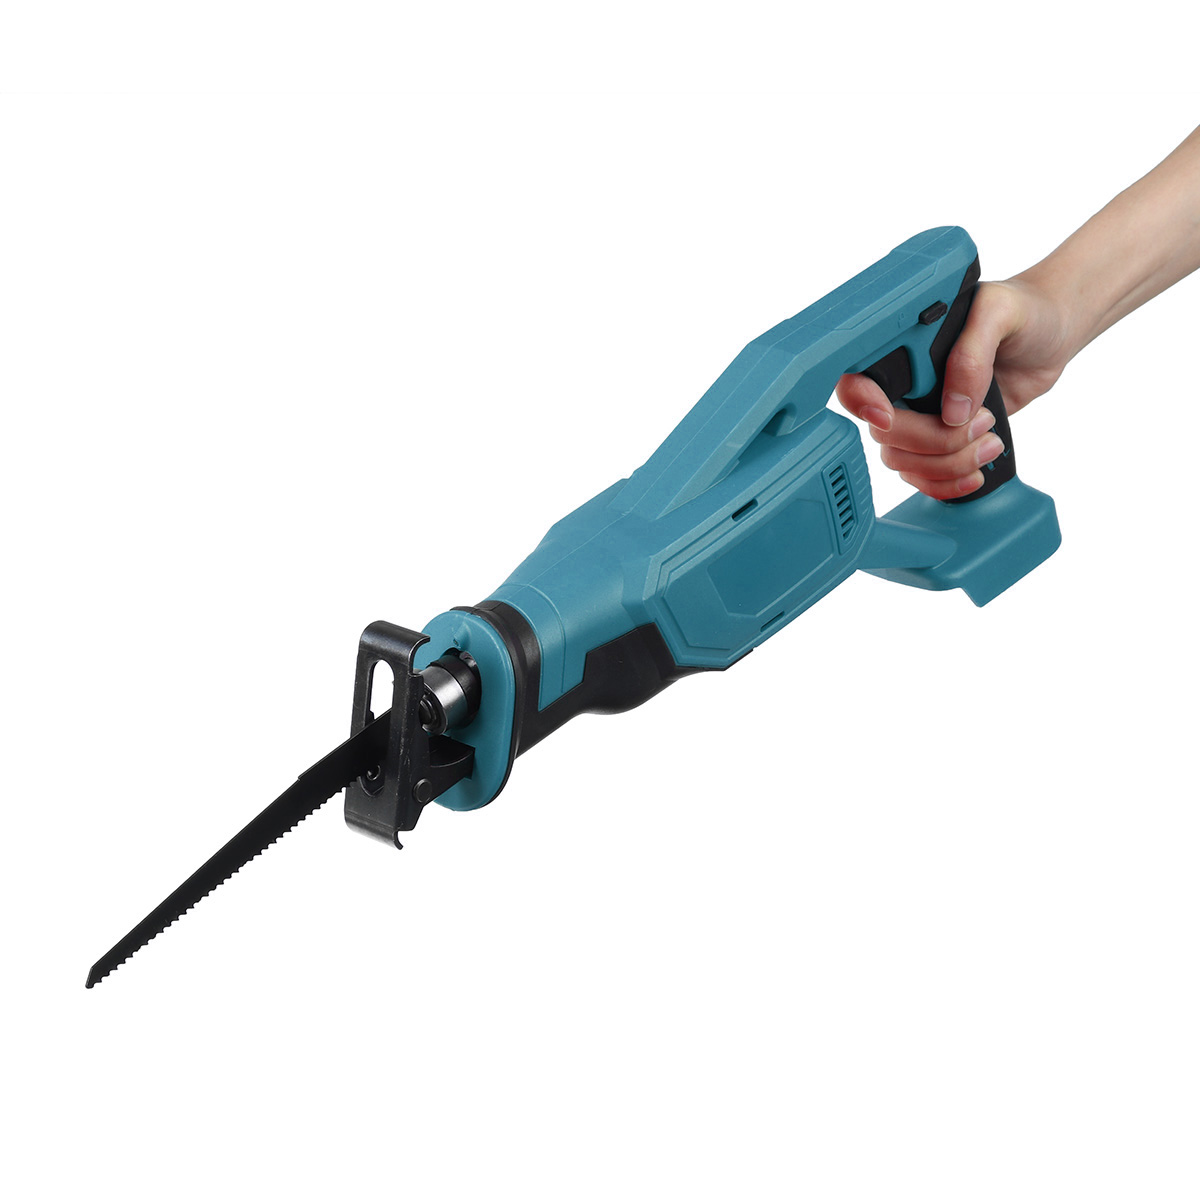 Cordless-Electric-Reciprocating-Saw-PVC-Pipes-Wood-Metal-Cutter-Without-Battery-1816495-7